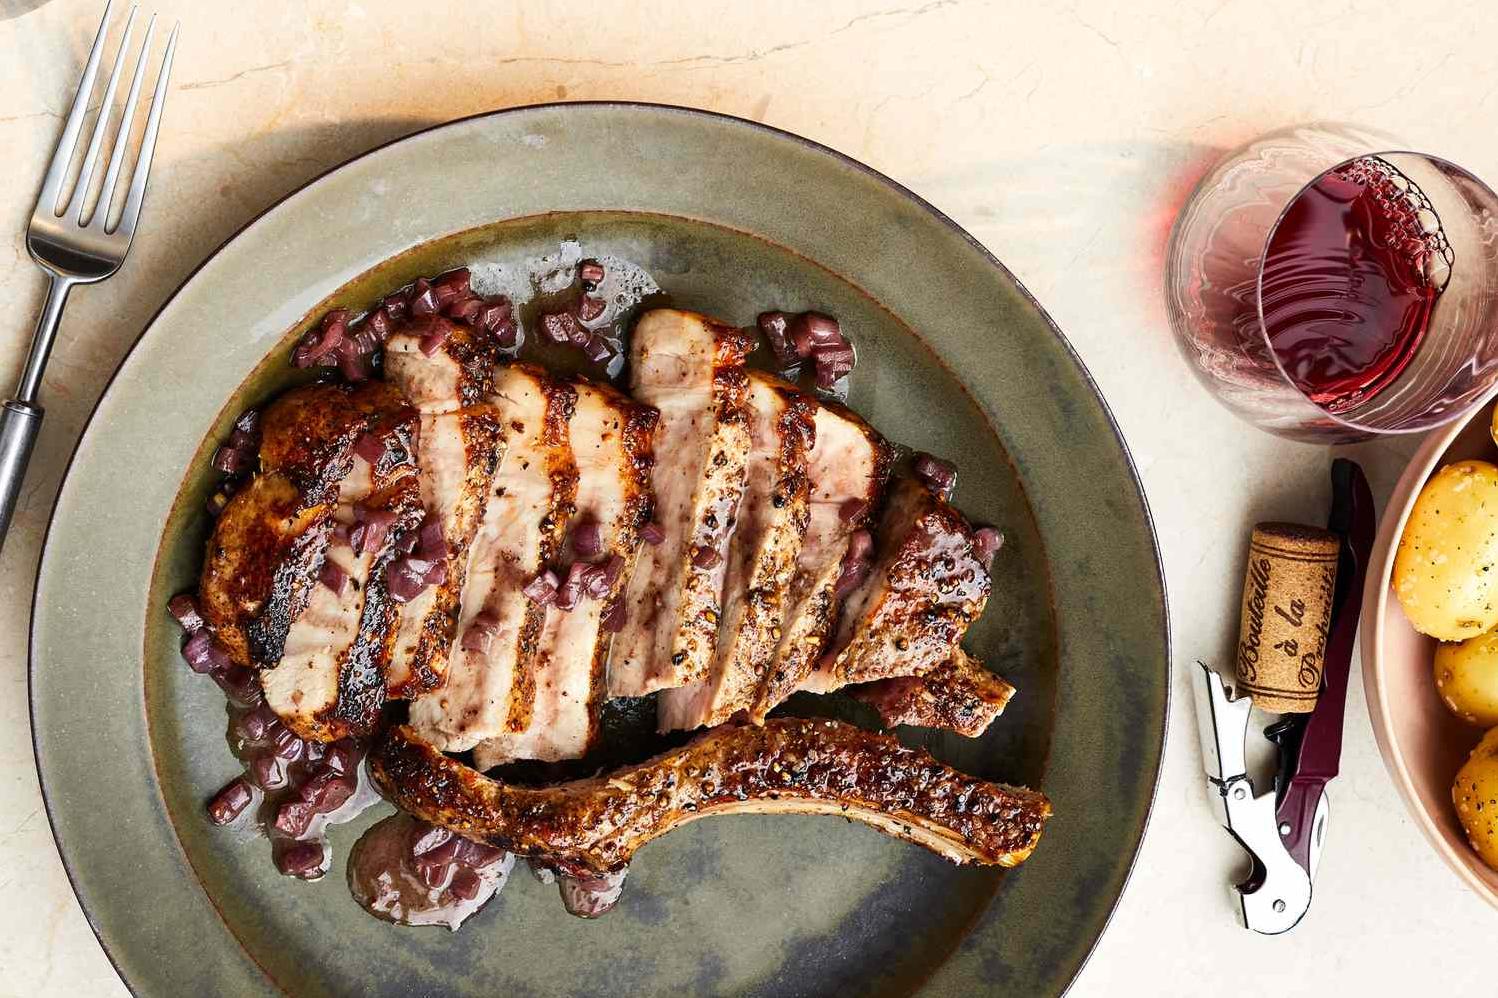  Elevate your weeknight dinner with this easy pork chop recipe